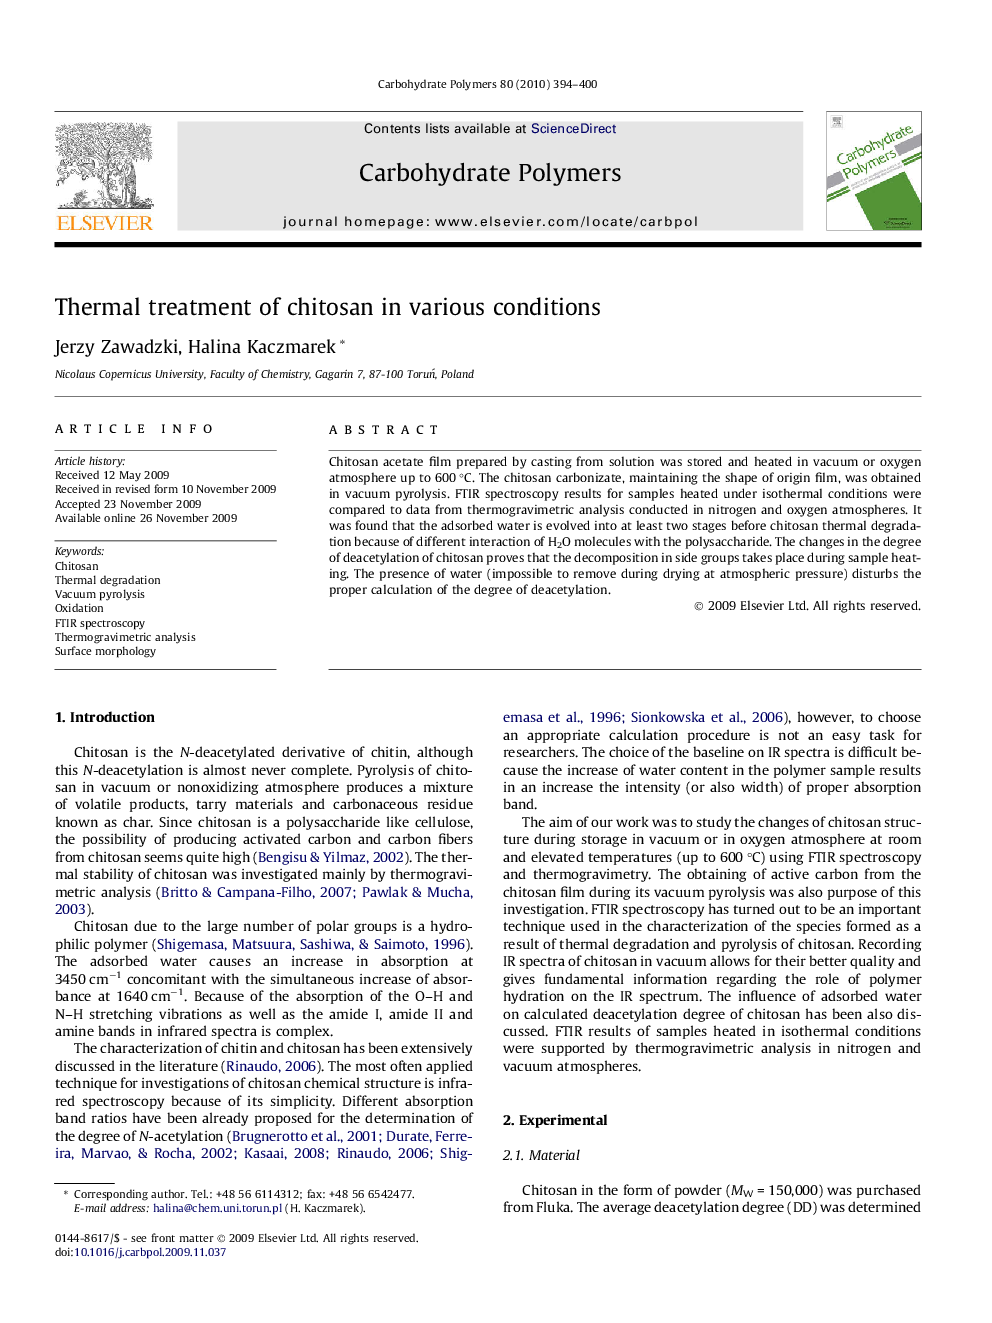 Thermal treatment of chitosan in various conditions